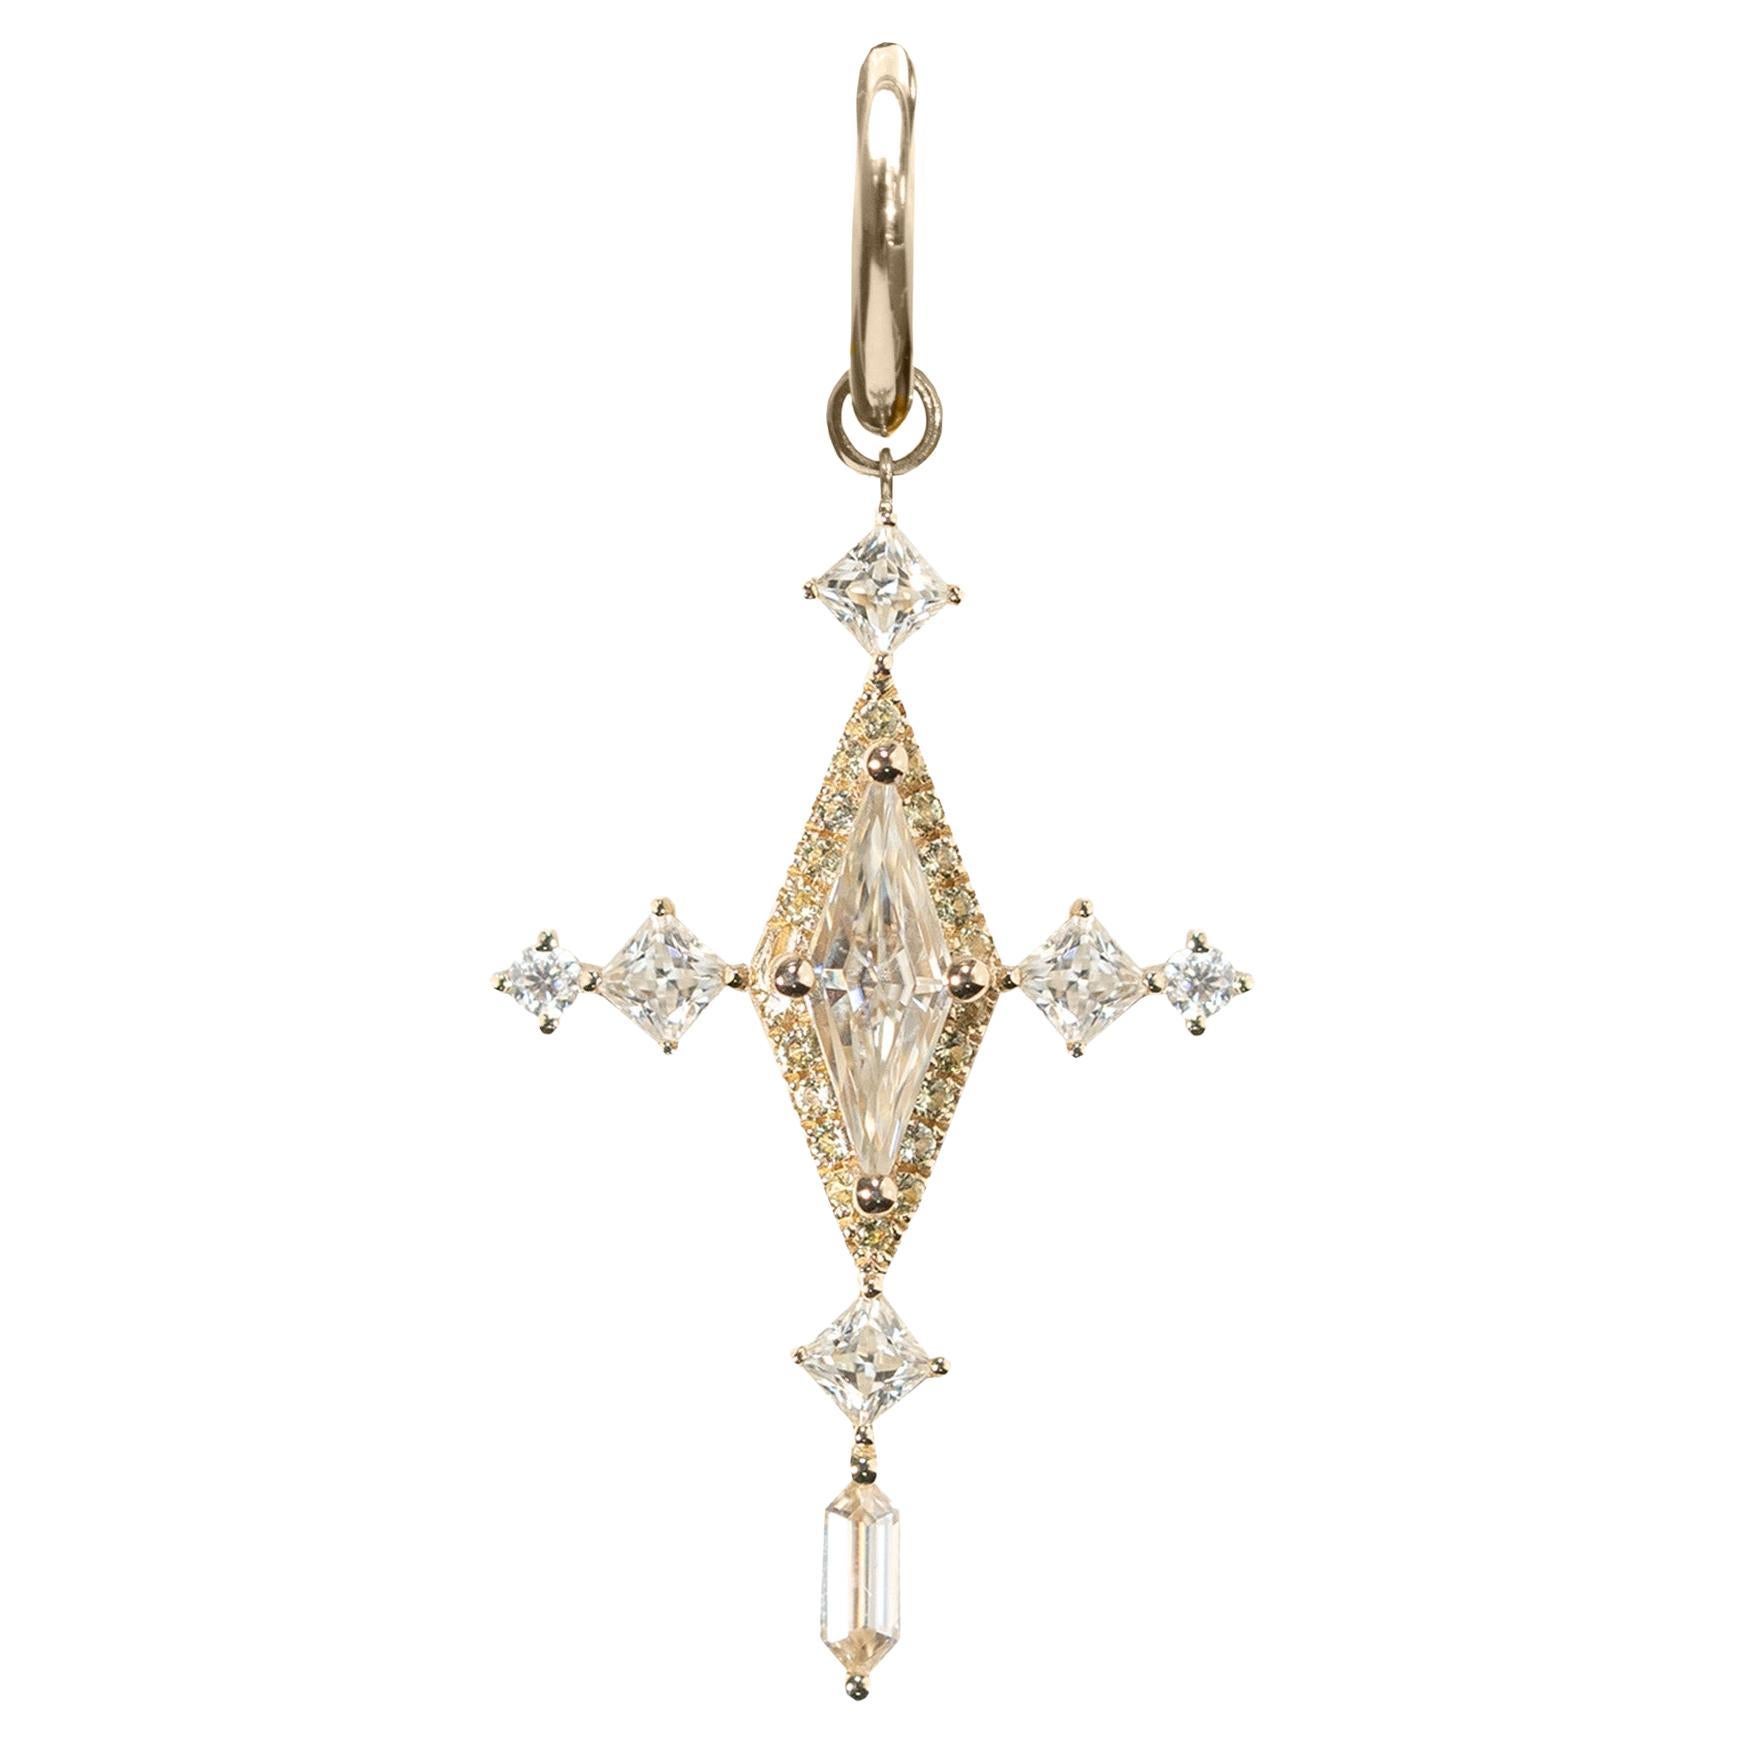 The Champagne Cross- 14kt Yellow Gold Drop Hoop Earring and Pendant